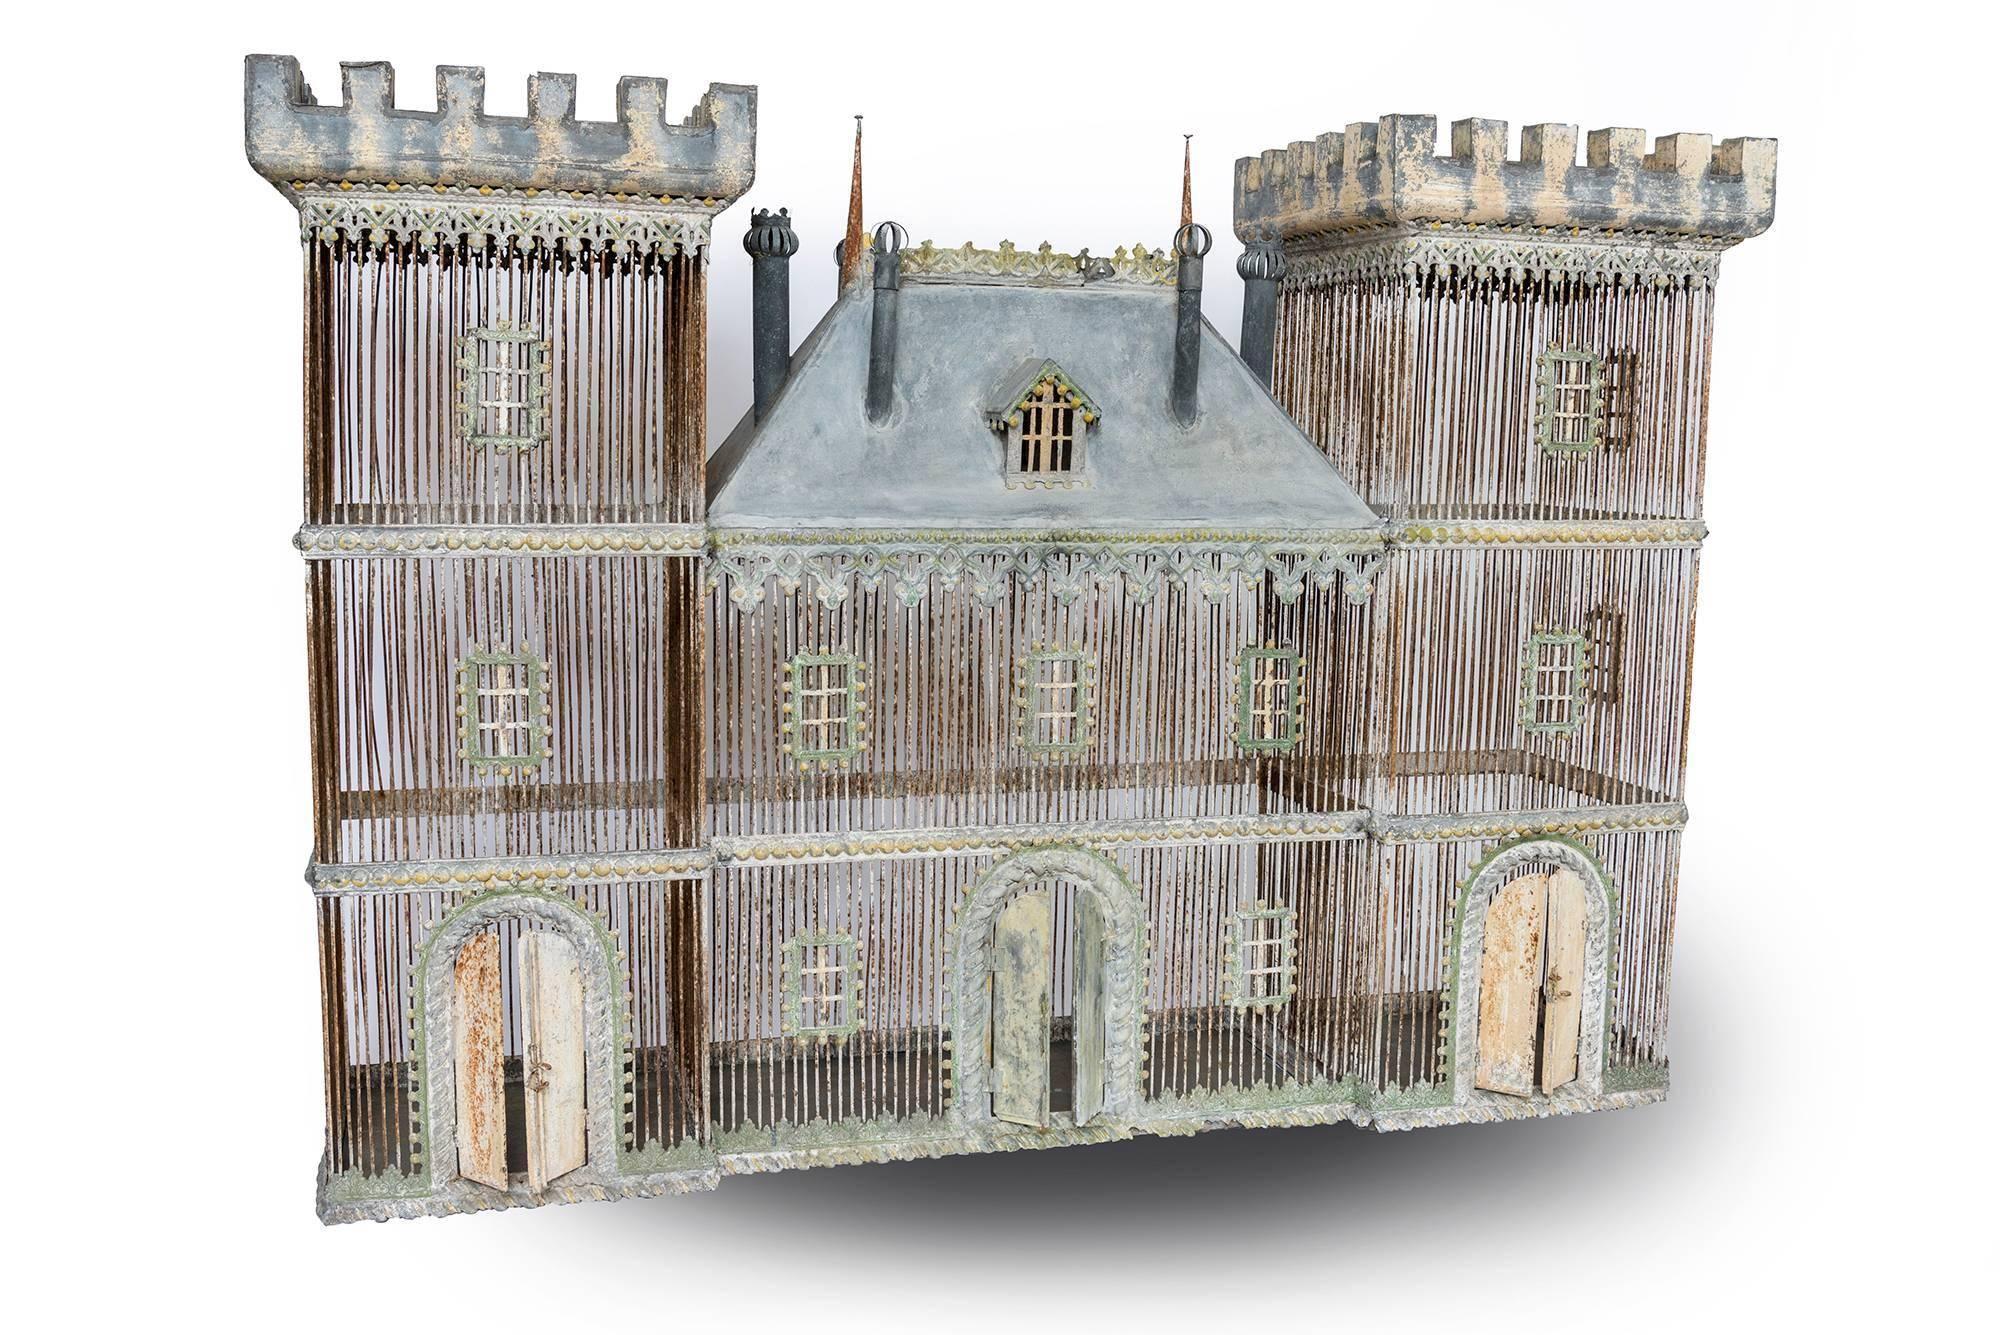 A rare and incredibly beautiful birdcage made in zinc with doors that open. This is in the form of a Medieval castle from France from the early 20th century. Painted in varying colors of green and yellow, with some blue showing through. This would